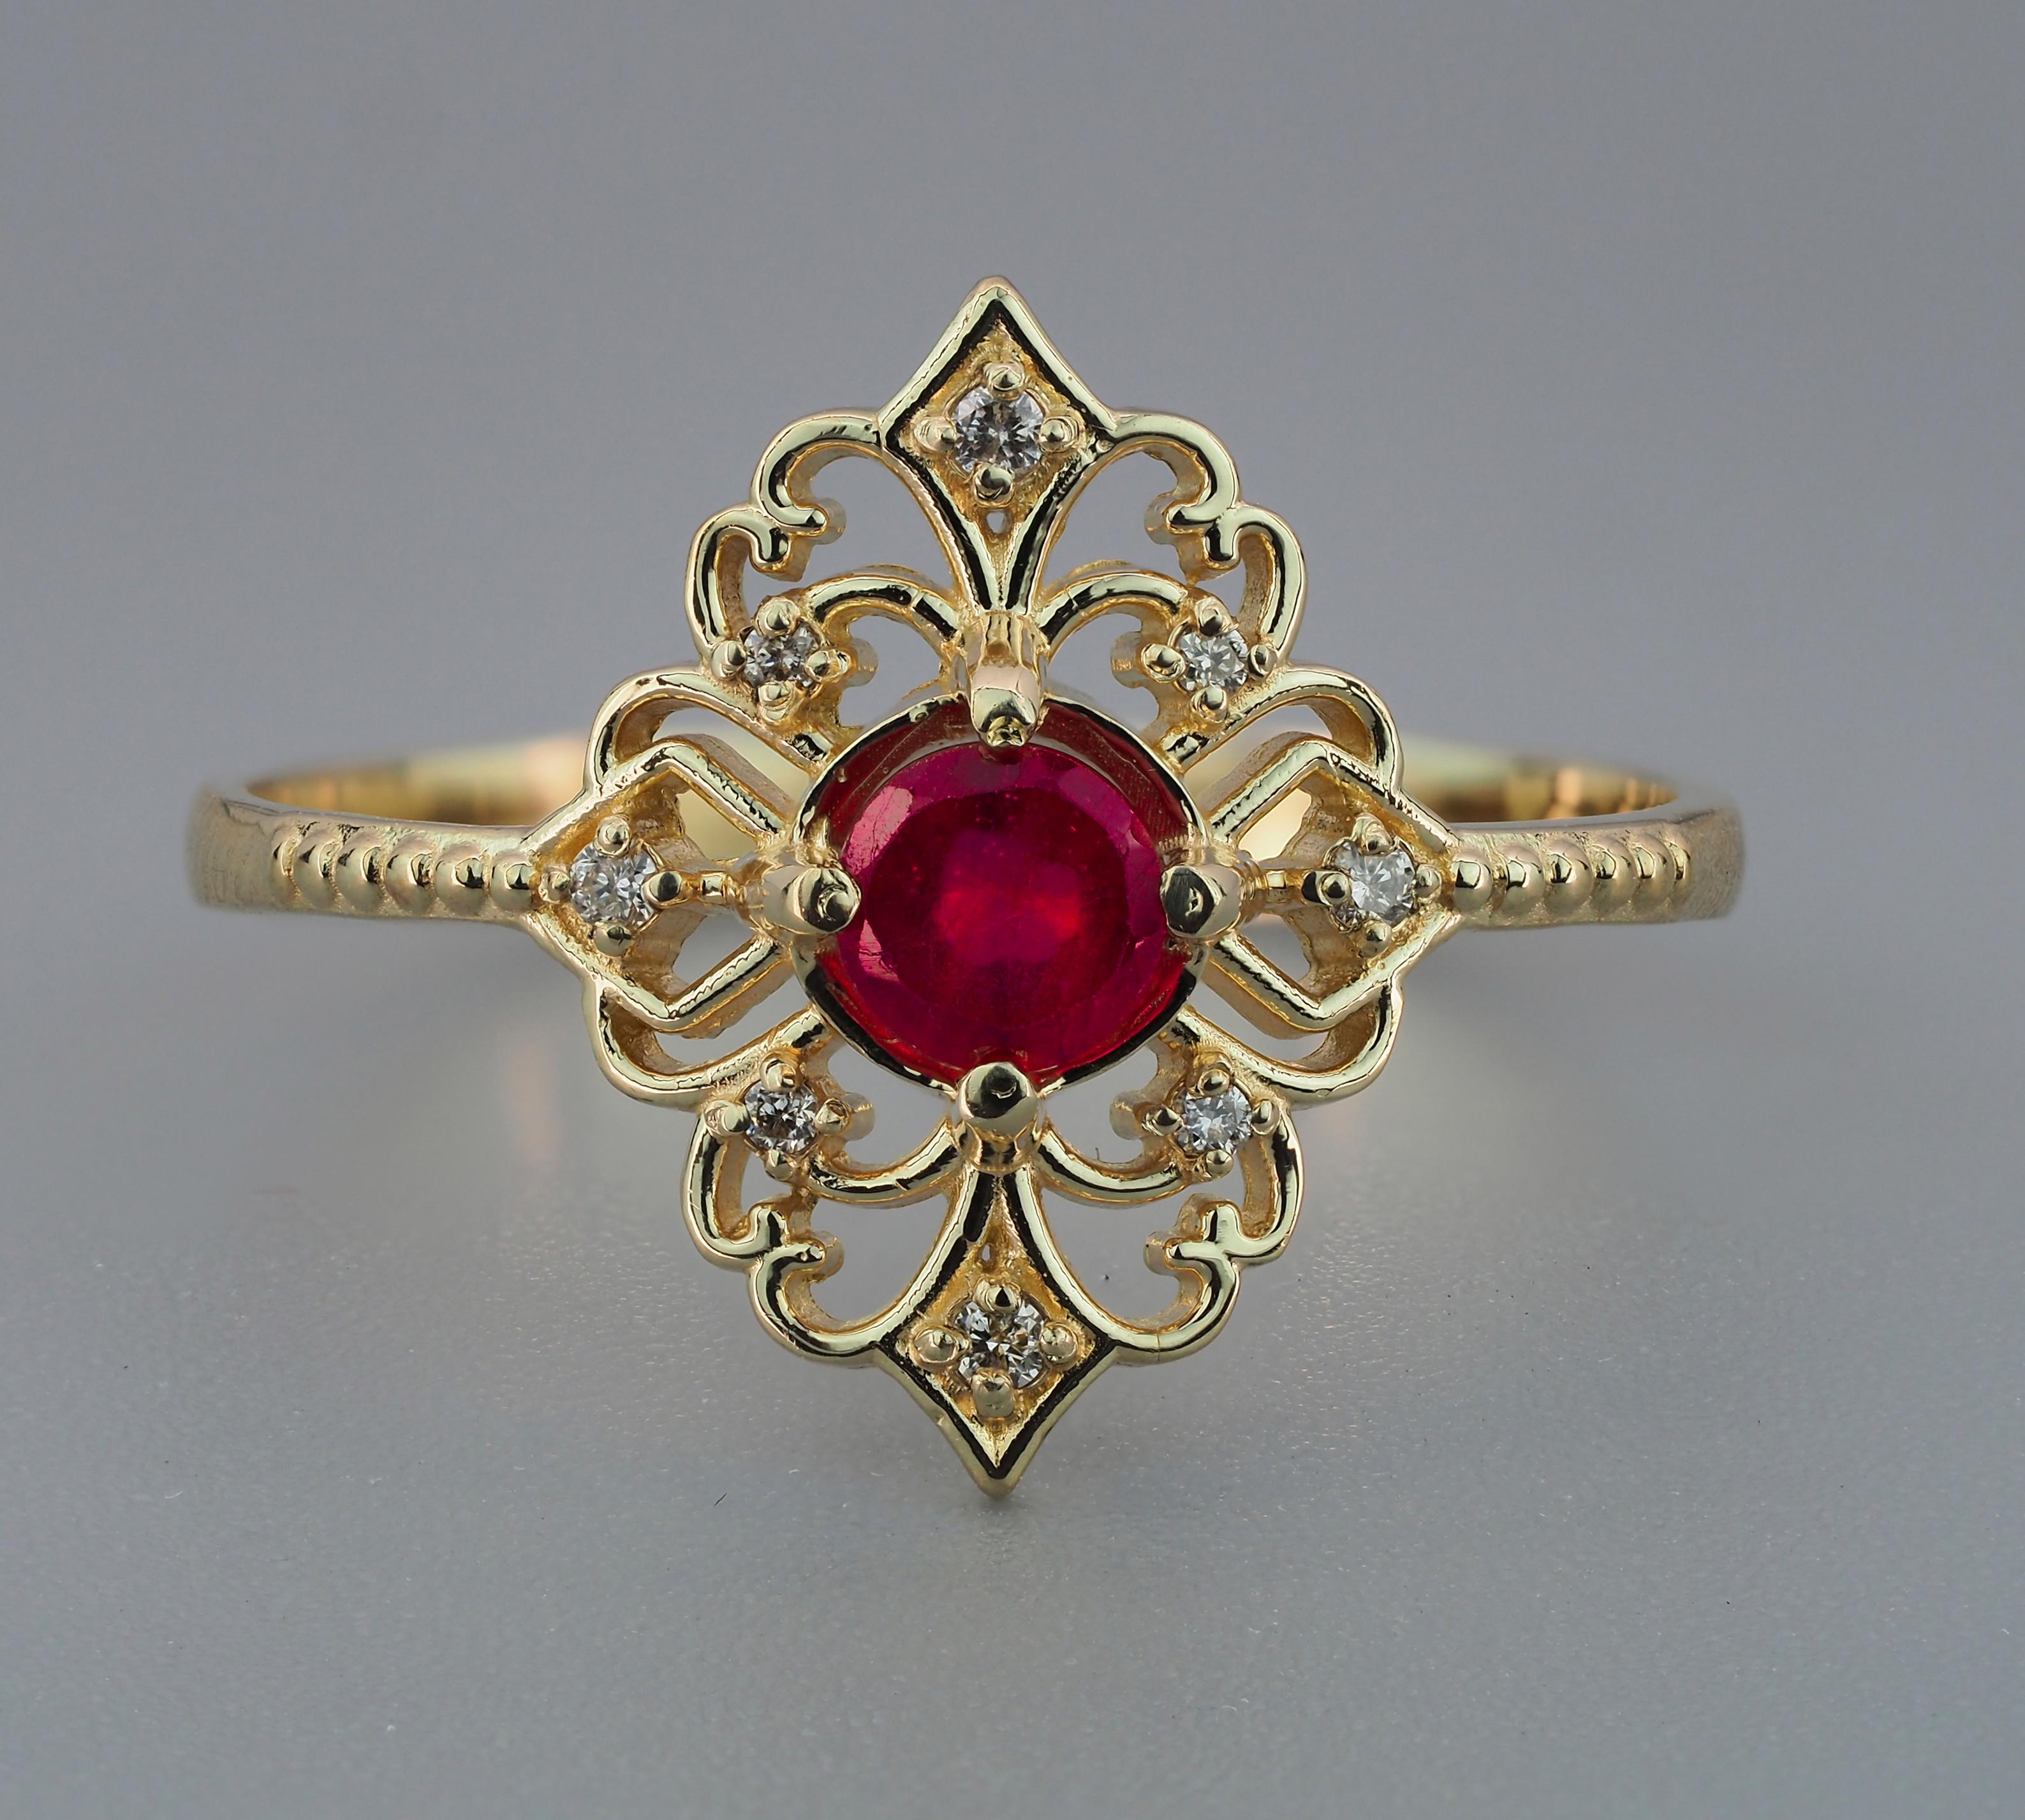 Round ruby 14k gold ring. 
Vintage ruby ring. Ruby gold ring. Red gemstone ring. July birthstone ring. Ruby, diamonds ring. Genuine ruby ring.

Metal: 14k gold
Weight: 1.9 g. depends from size.

Central stone: Ruby
Cut: Round
Weight: aprx 0.5